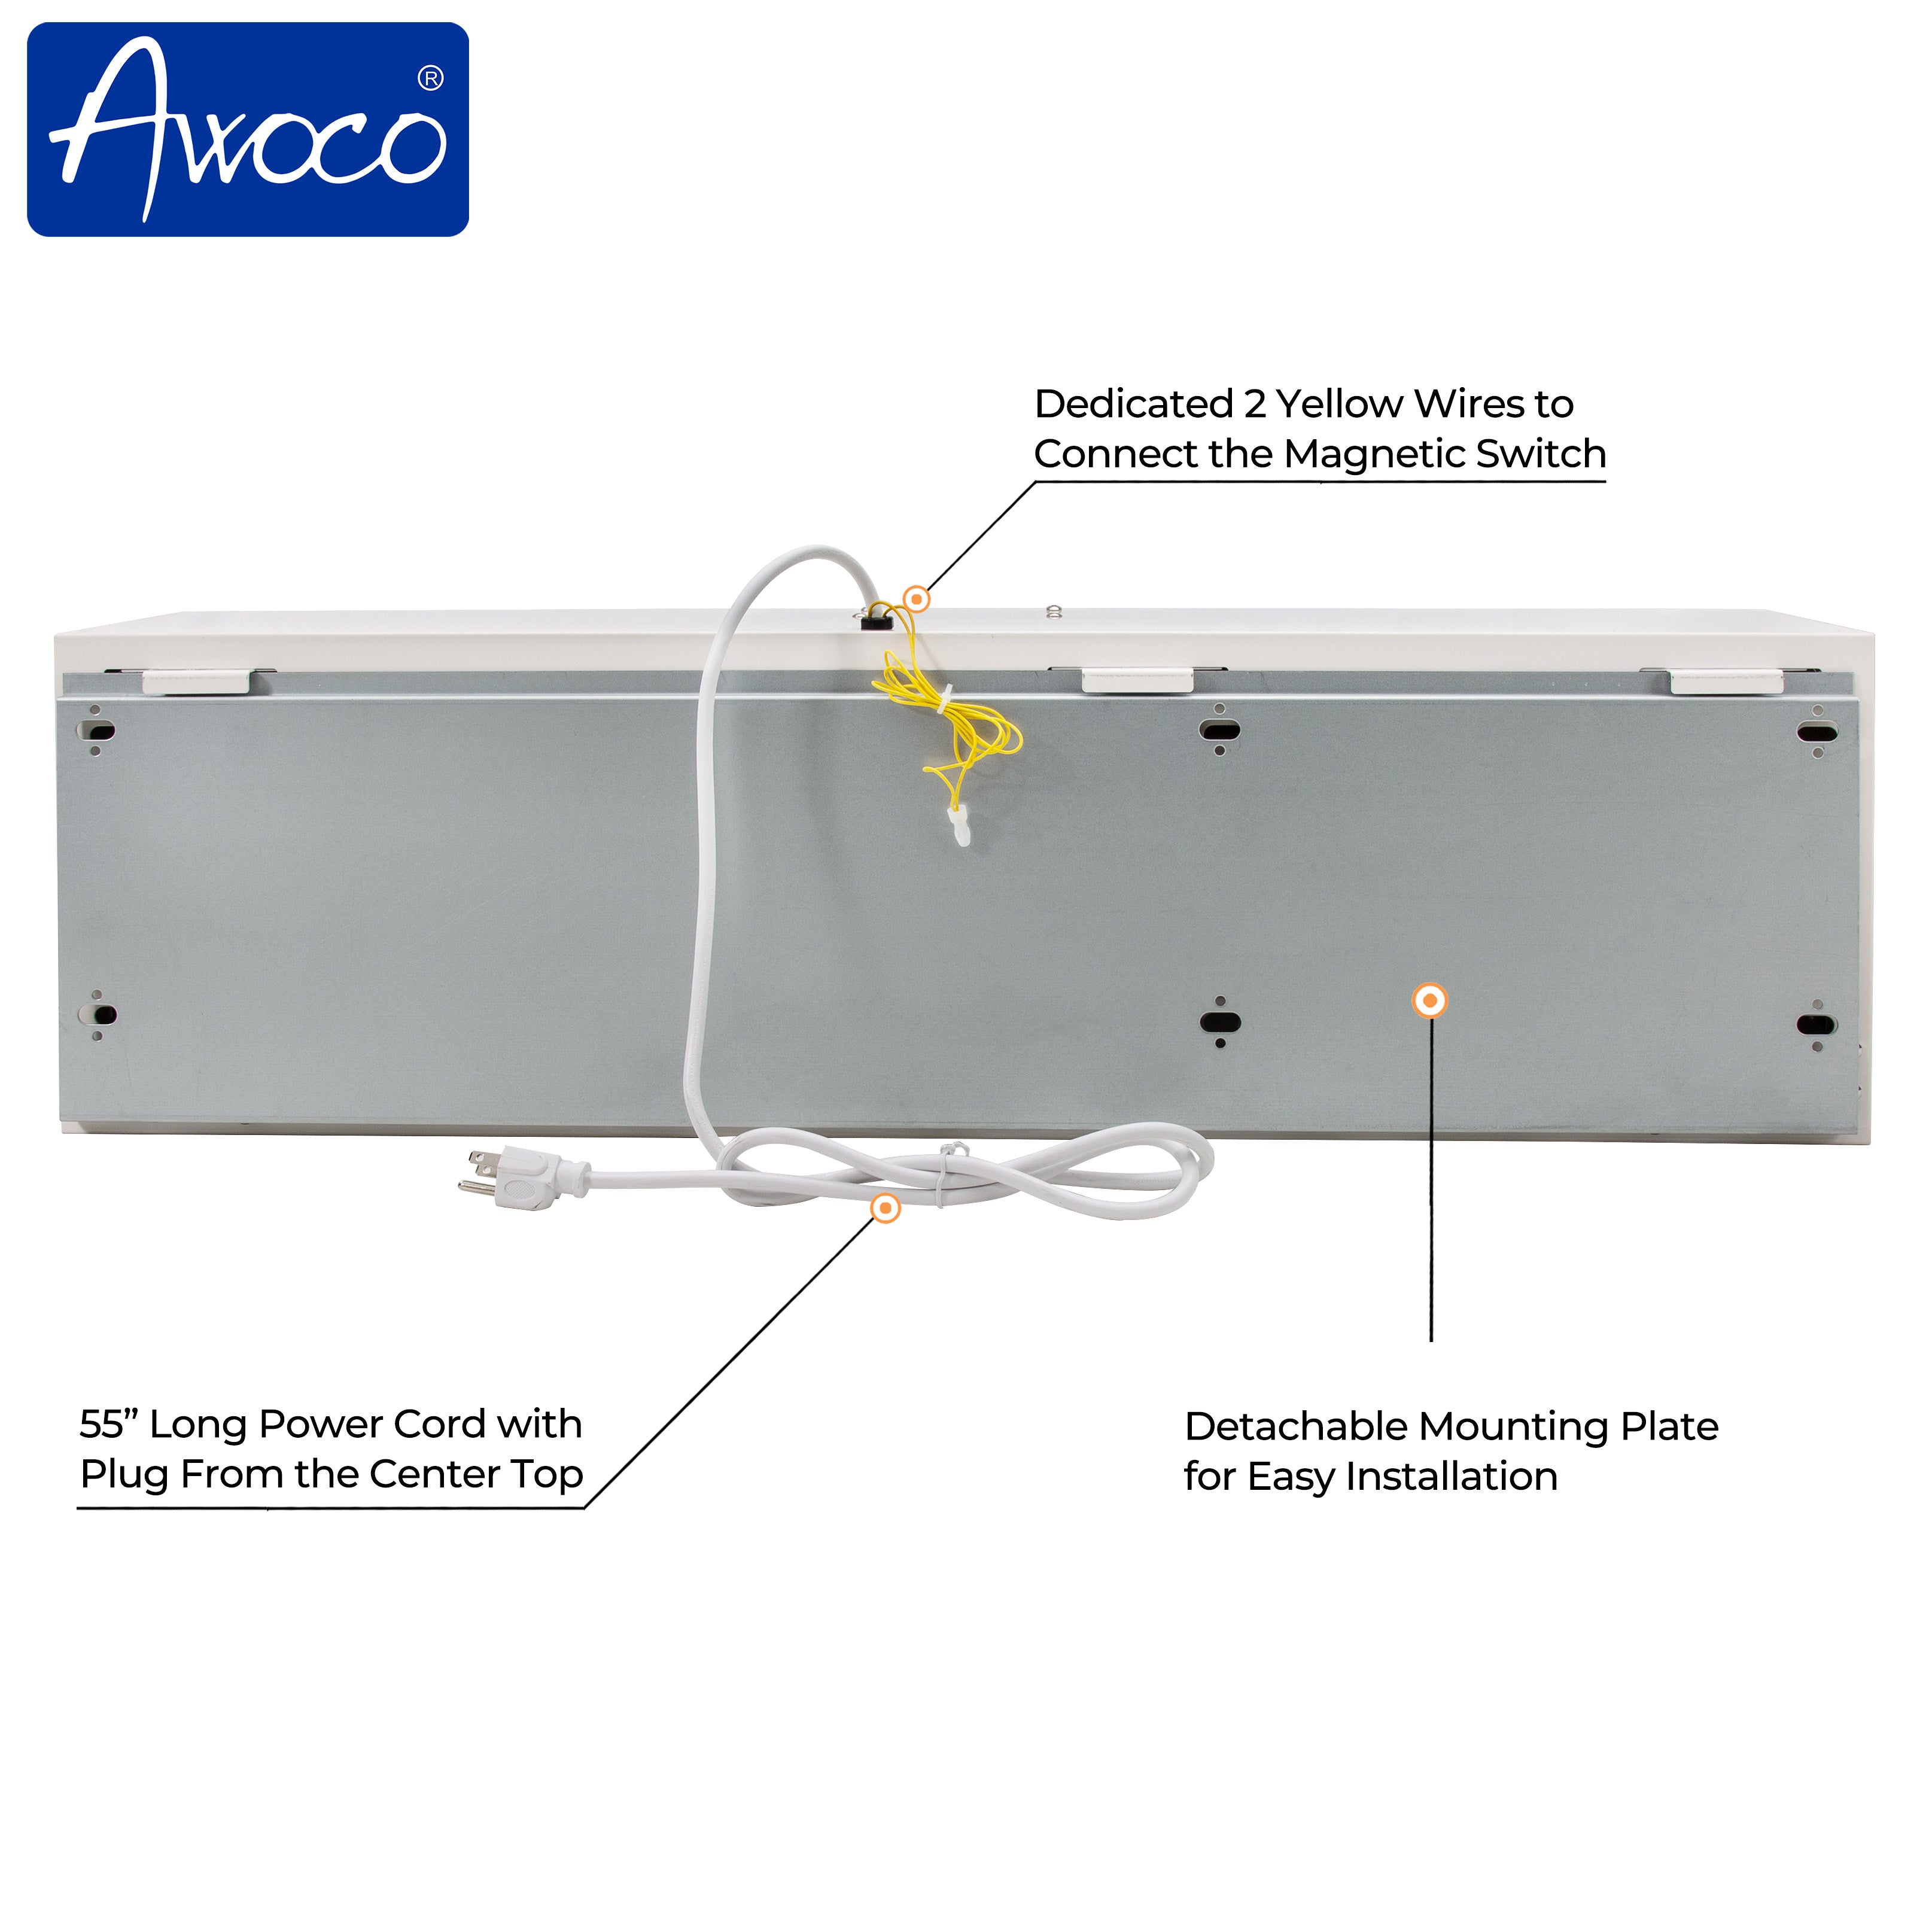 Awoco 36” Super Power 2 Speeds 1200 CFM Commercial Indoor Air Curtain, UL Certified, 120V Unheated with Shutoff Delay Magnetic Switch for Swinging Doors